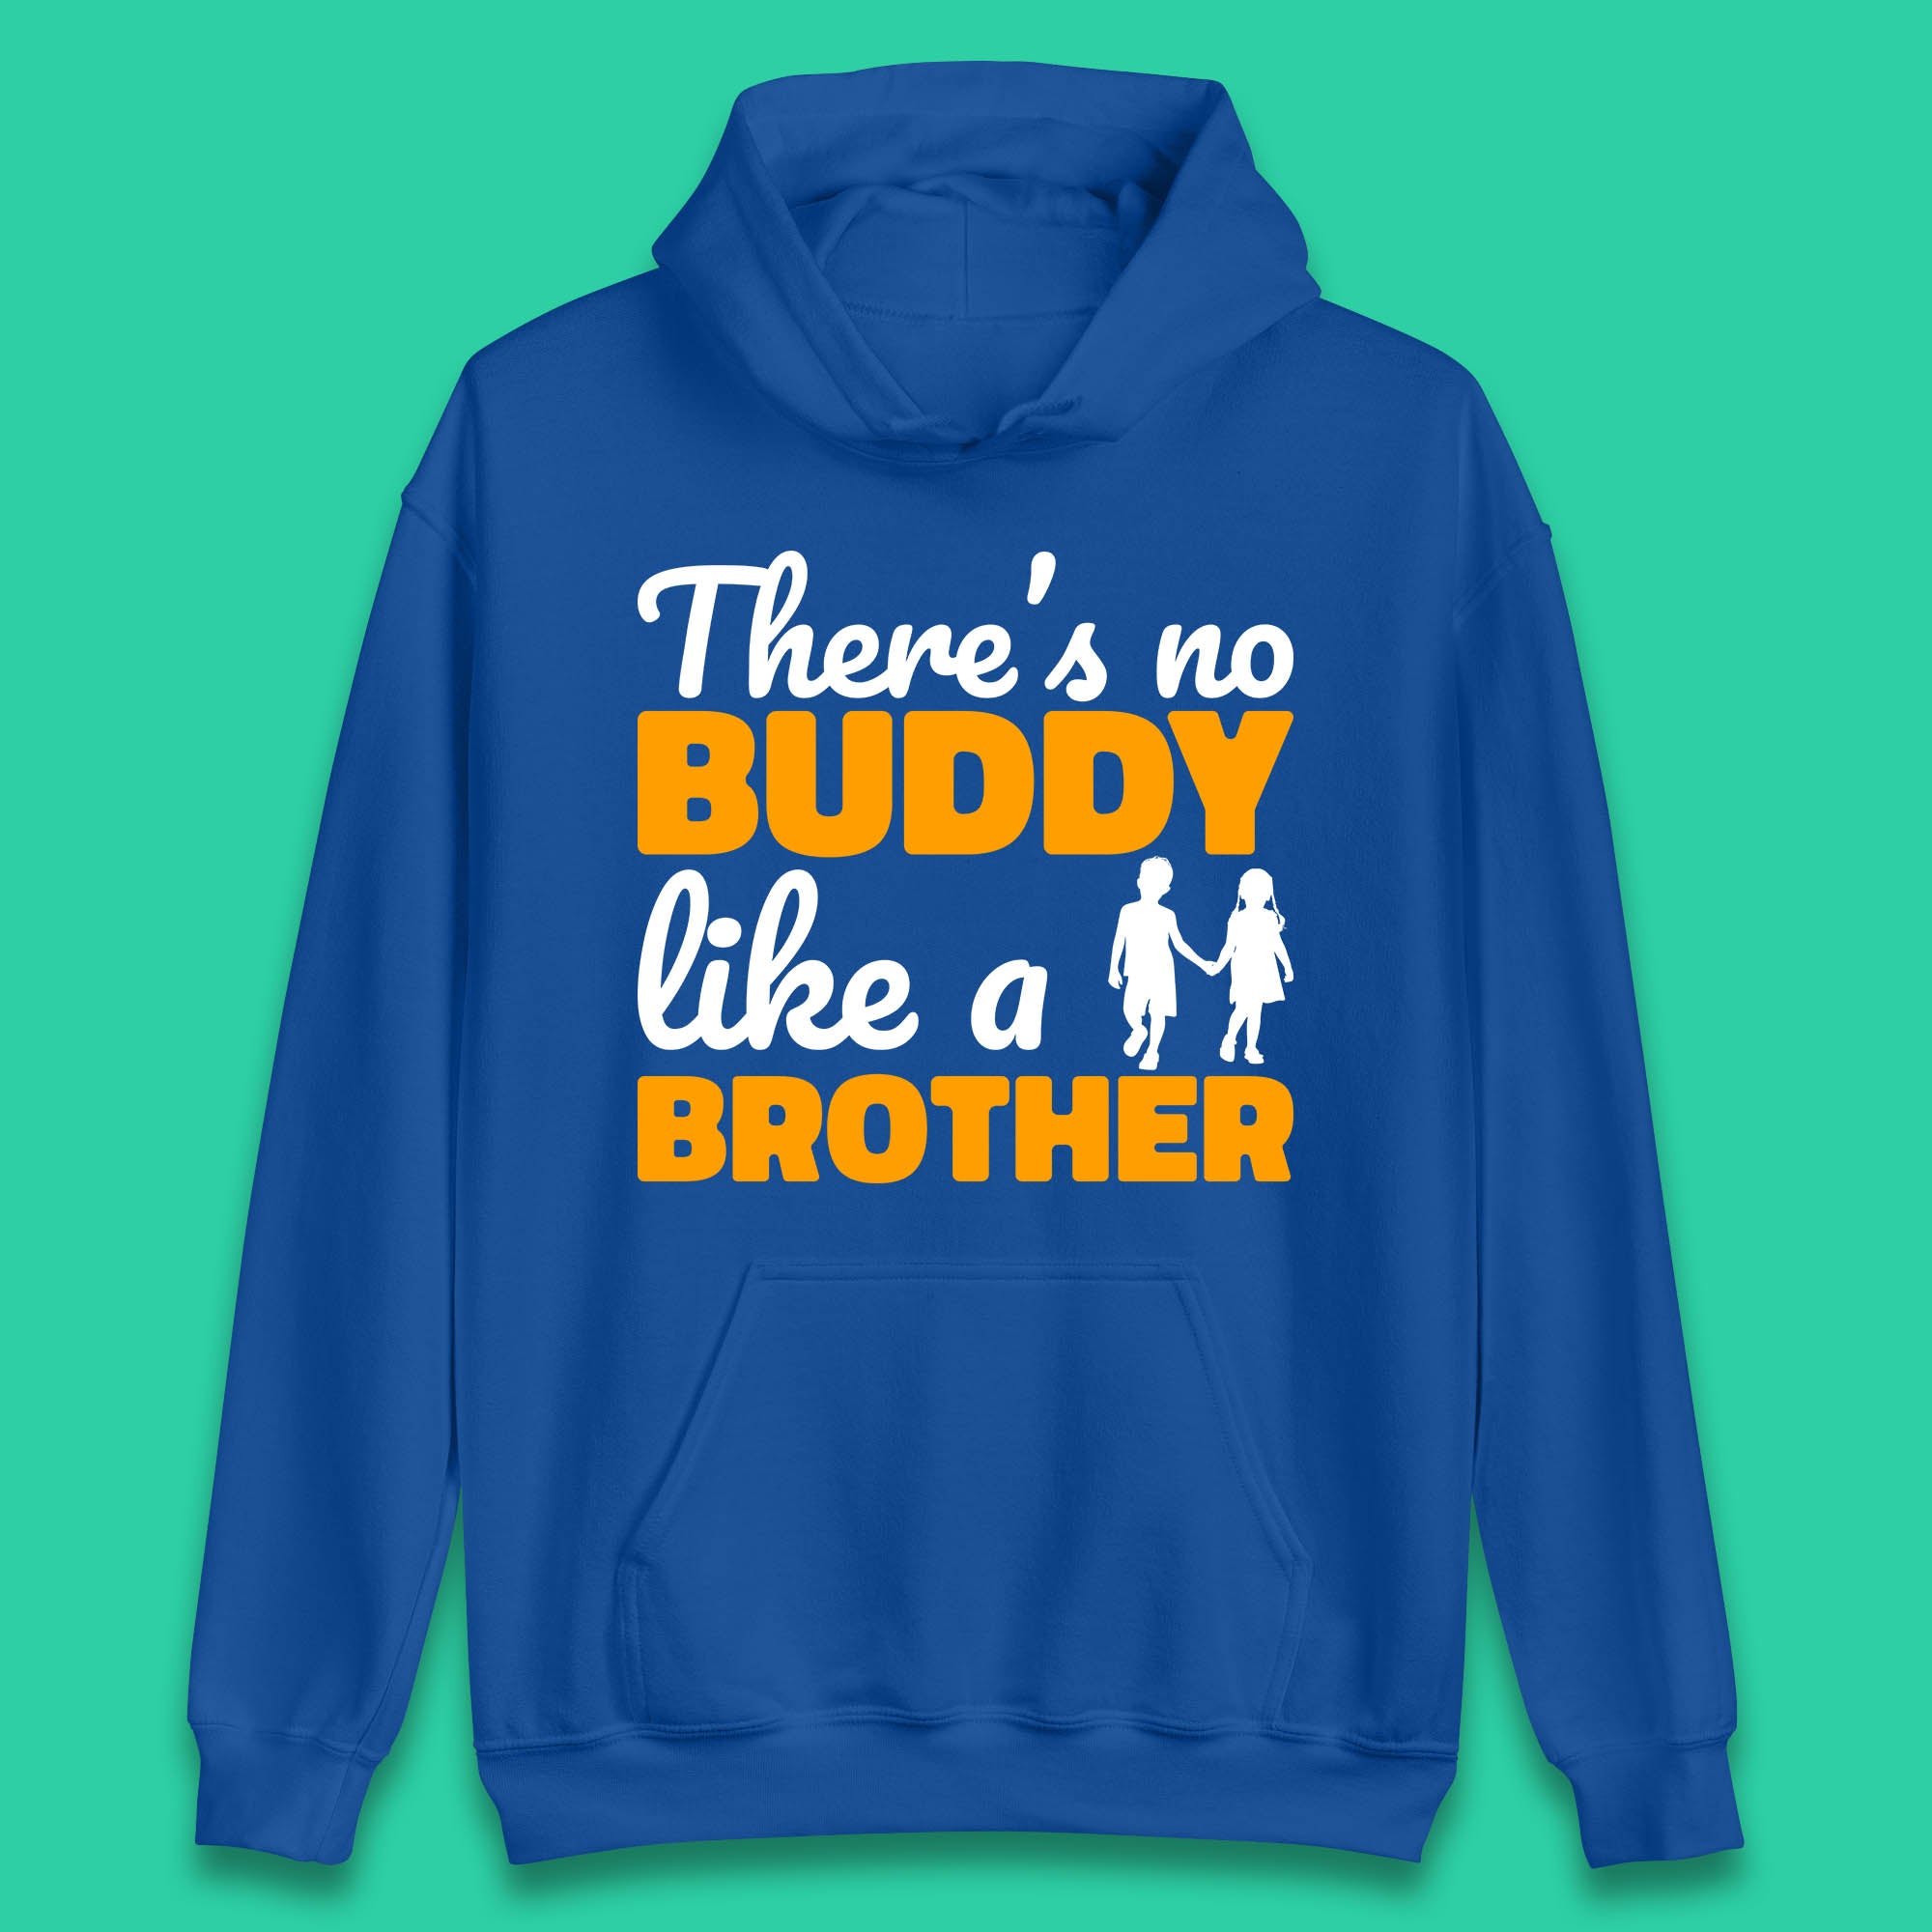 There's No Buddy Like A Brother Funny Siblings Novelty Best Buddy Brother Quote Unisex Hoodie